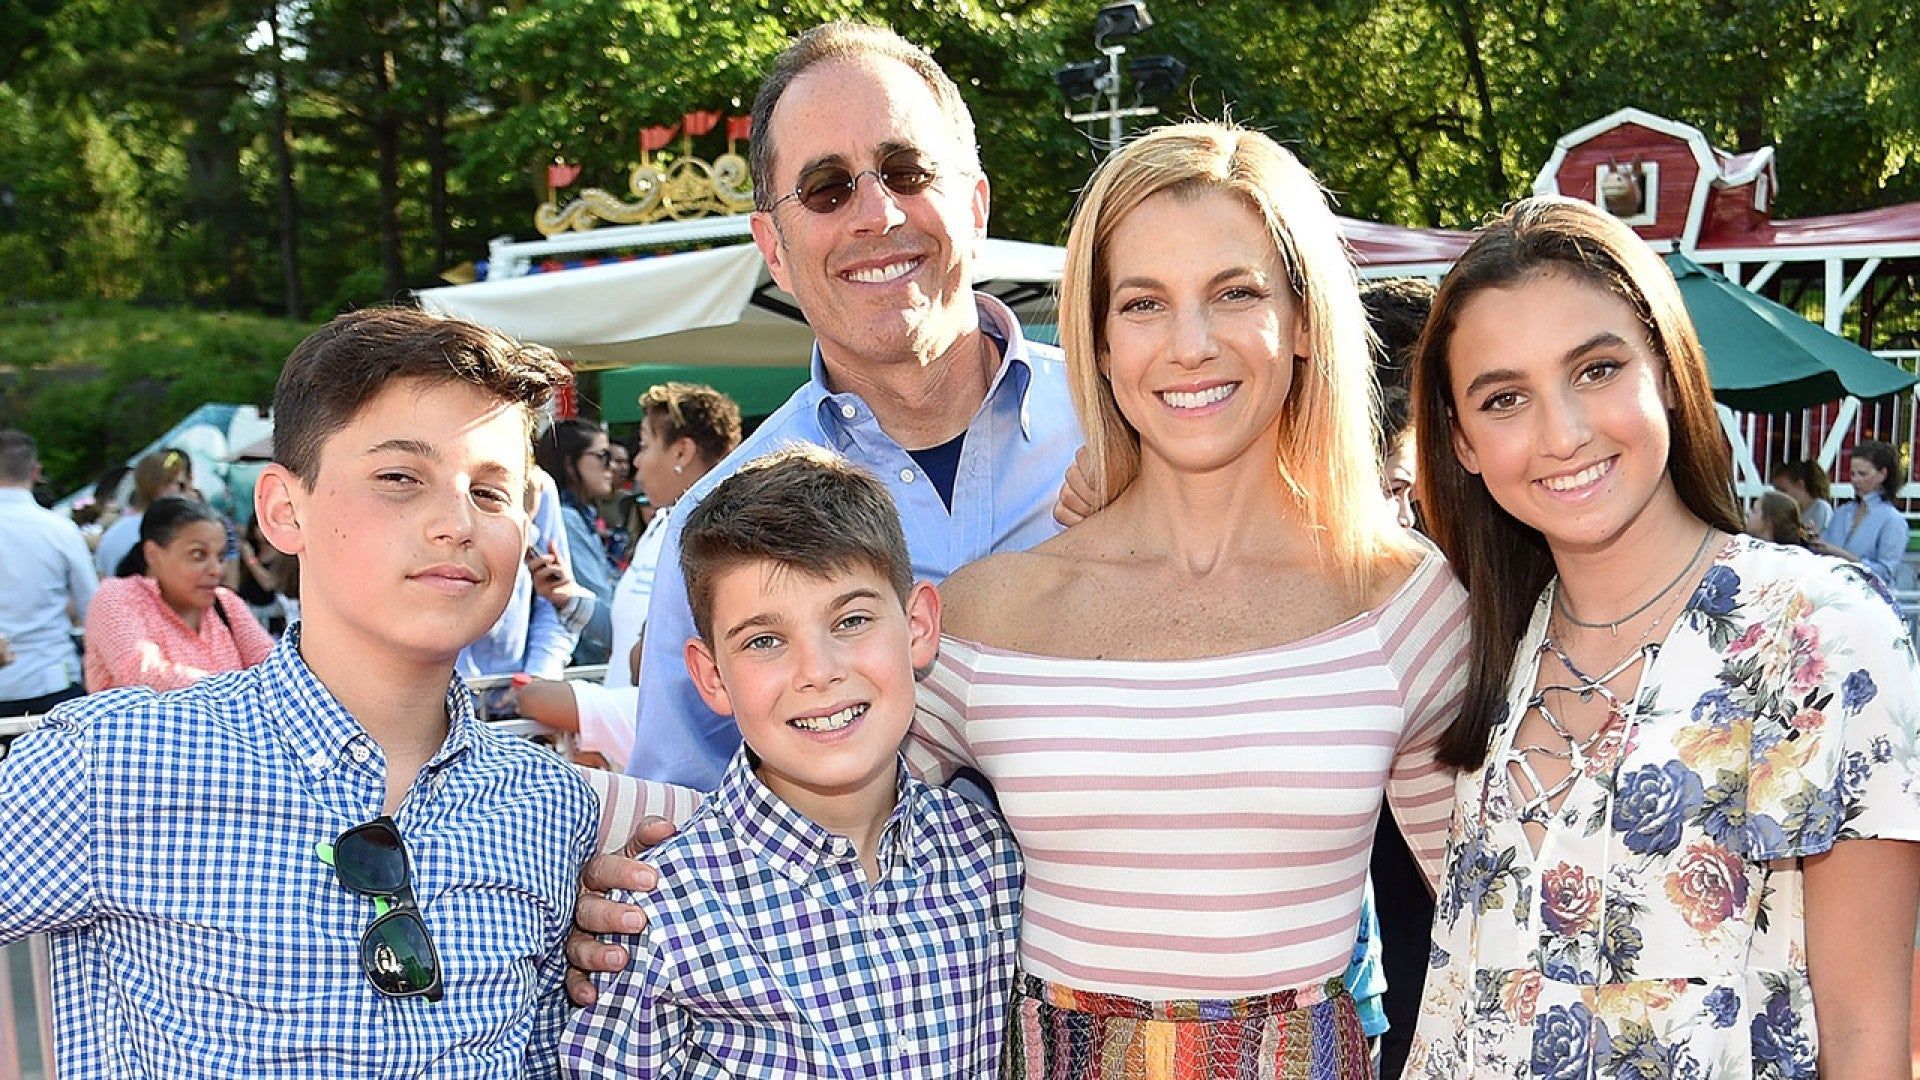 Jerry Seinfeld Makes Rare Public Appearance With Entire Family at Charity Event